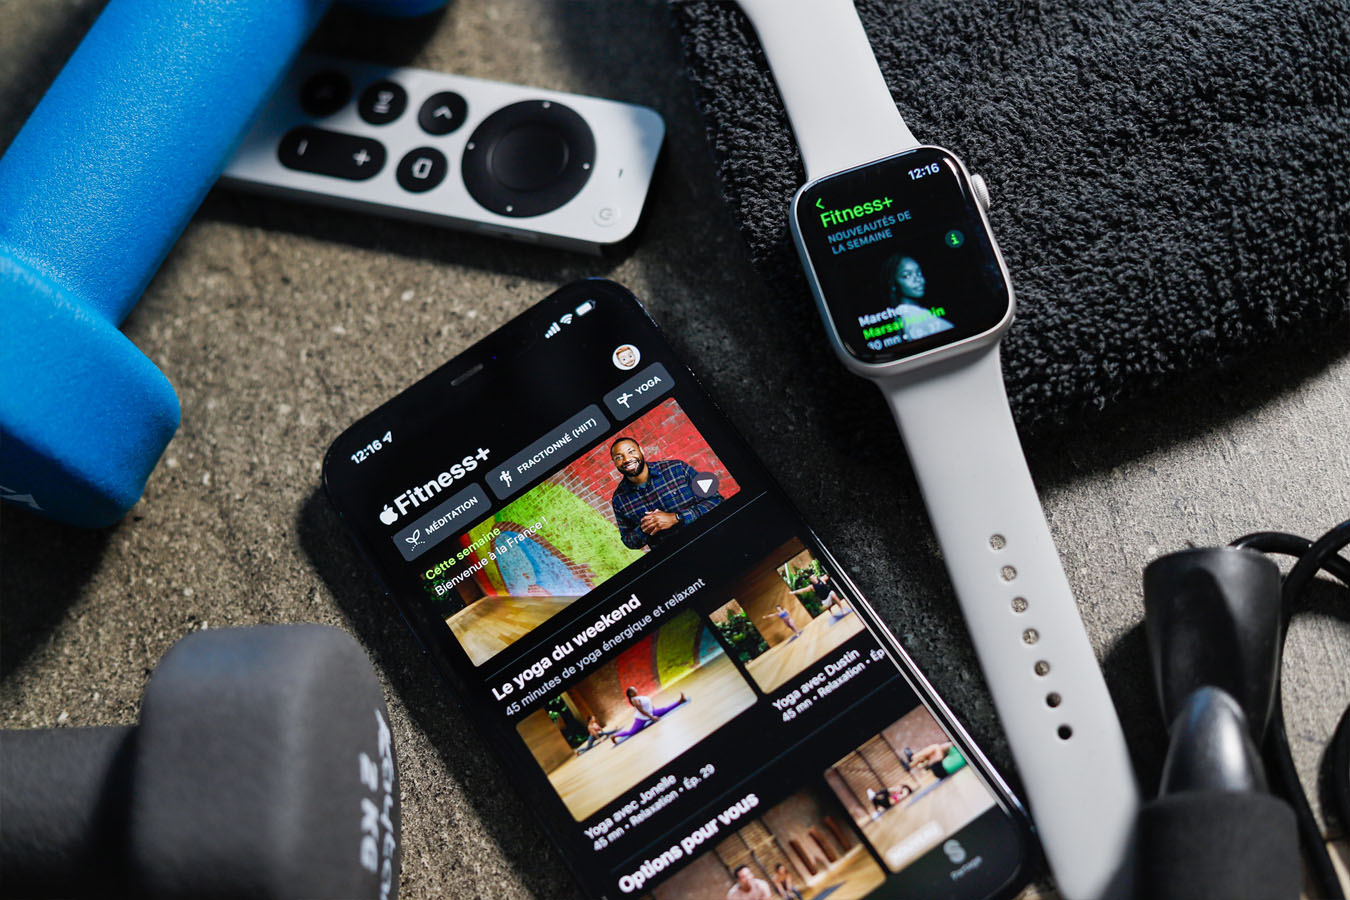 iPhone with the Apple Fitness+ app open, accompanied by sports accessories, an Apple Watch, and an Apple TV remote placed nearby. ©2021 Mathieu Improvisato